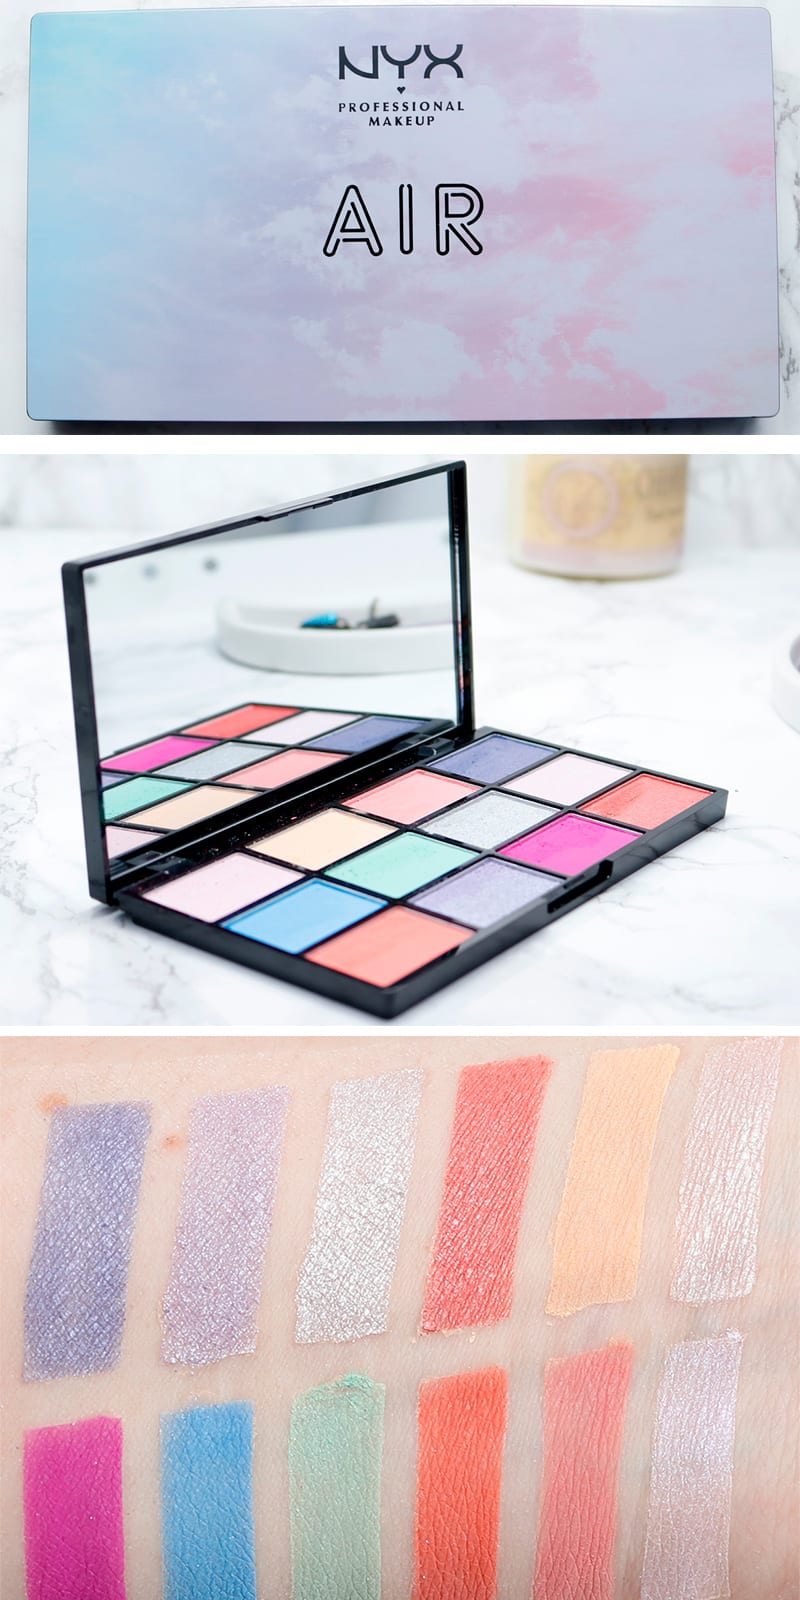 Nyx In Your Element Air Palette Review and swatches on pale skin